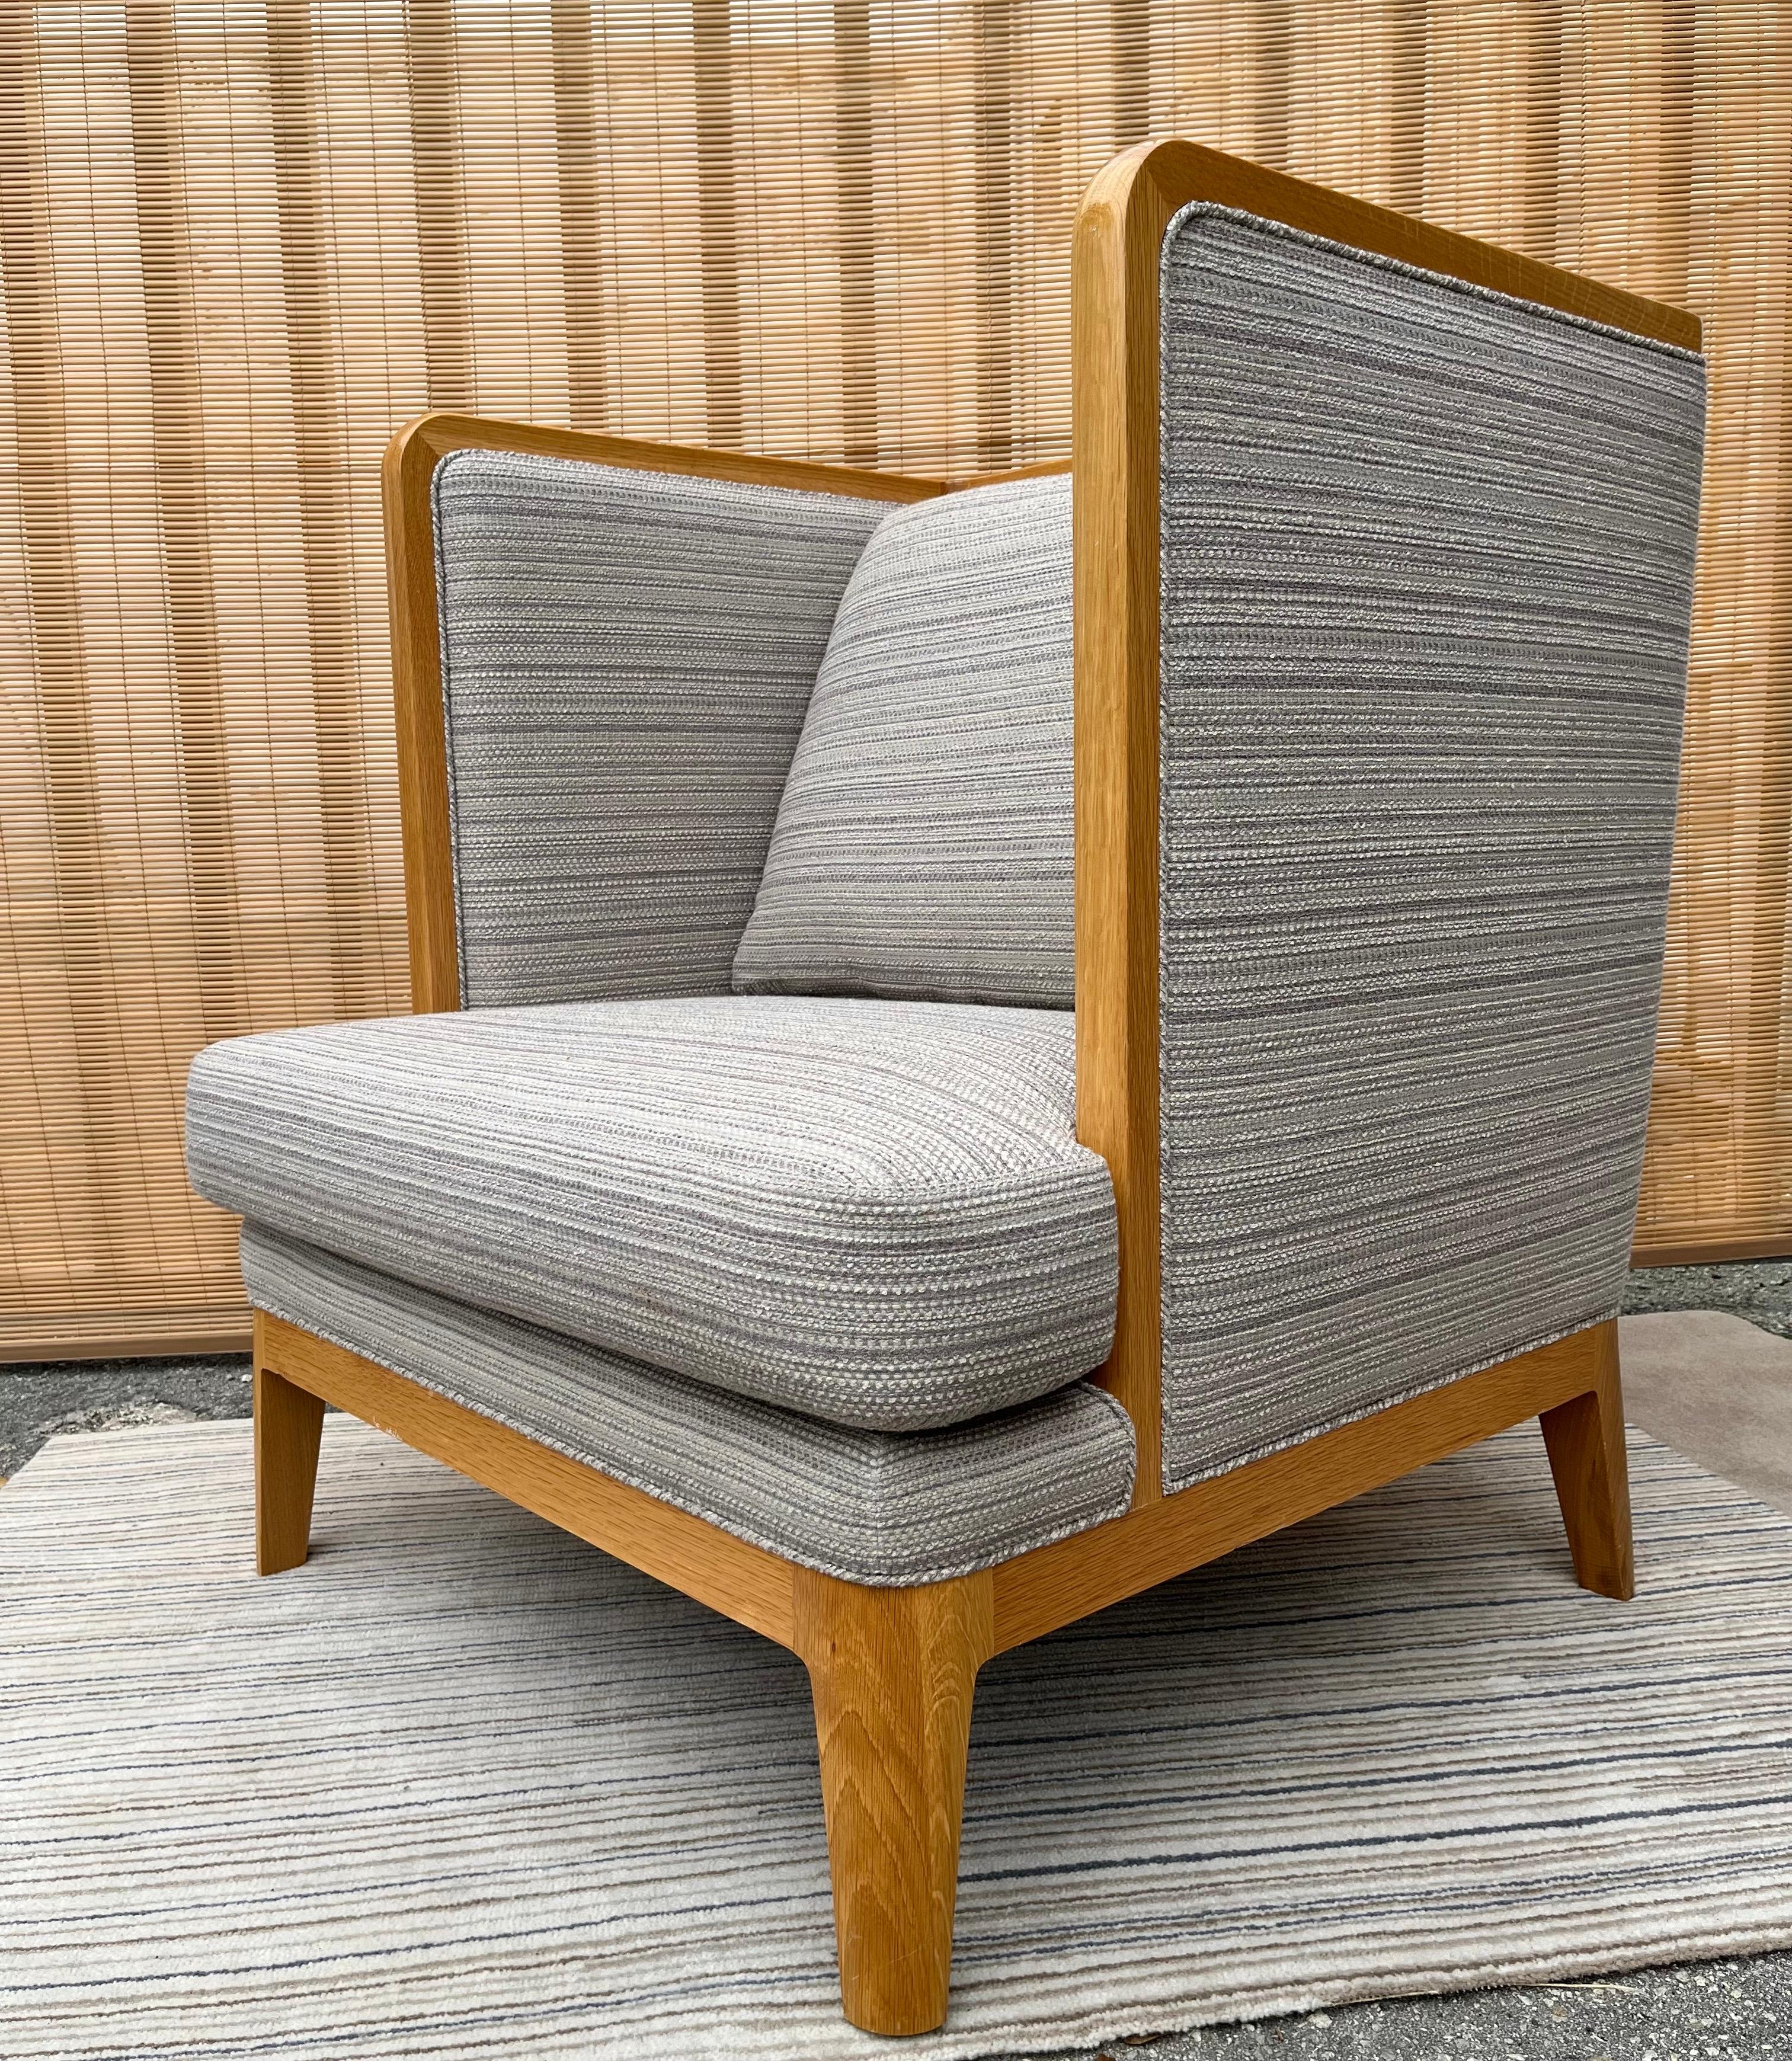 Contemporary 21st century upholstered wingback lounge chair. Circa 2010s. 
Features a simple silhouette and a sleek modern take on the traditional Wingback chair designs. An excellent hight end craftsmanship with a solid wood frame with rounded